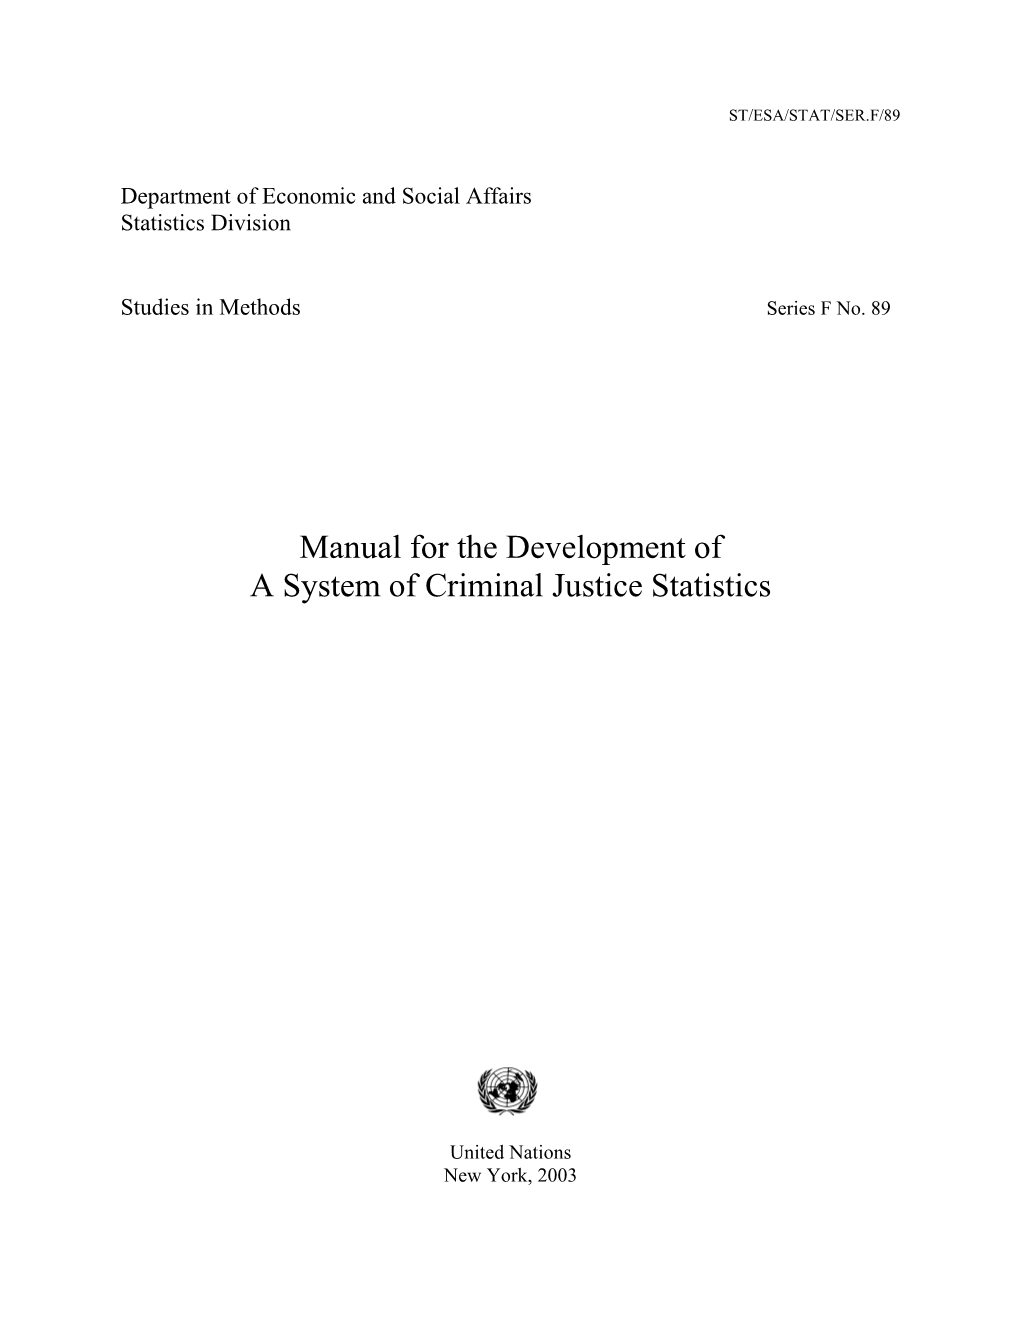 Manual for the Development of a System of Criminal Justice Statistics